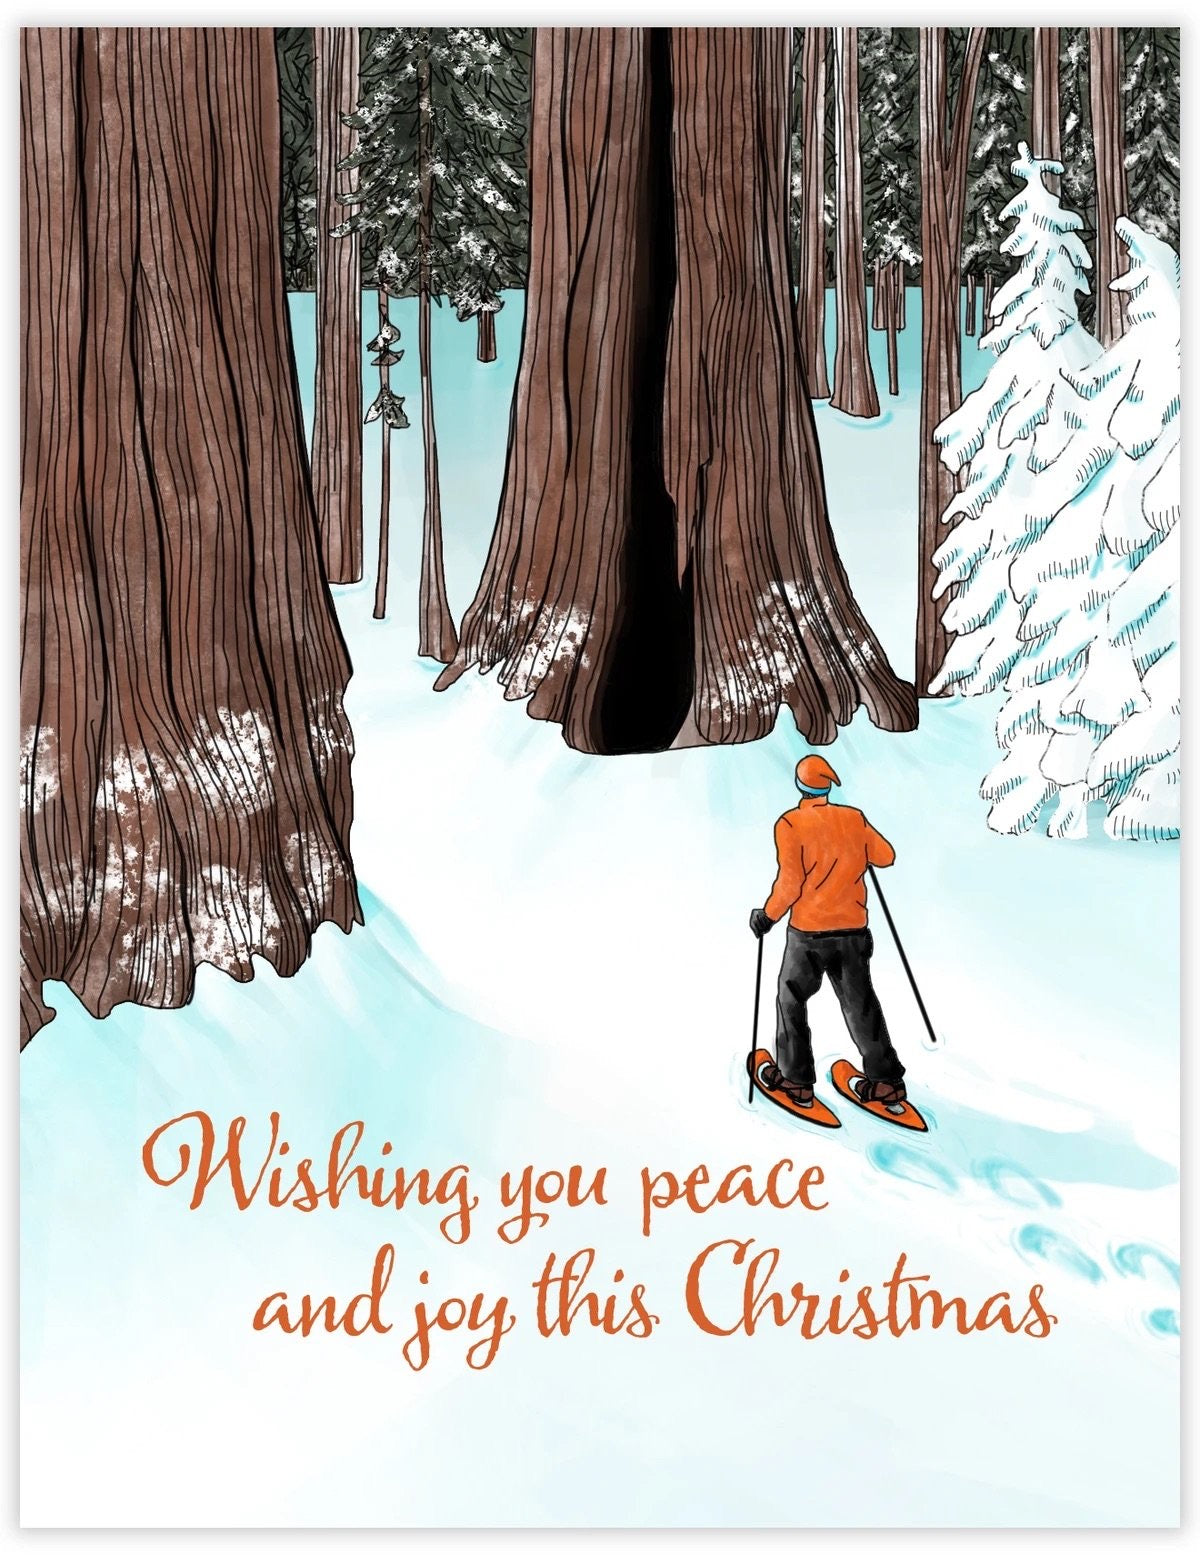 Wishing you peace and joy this Christmas greeting card